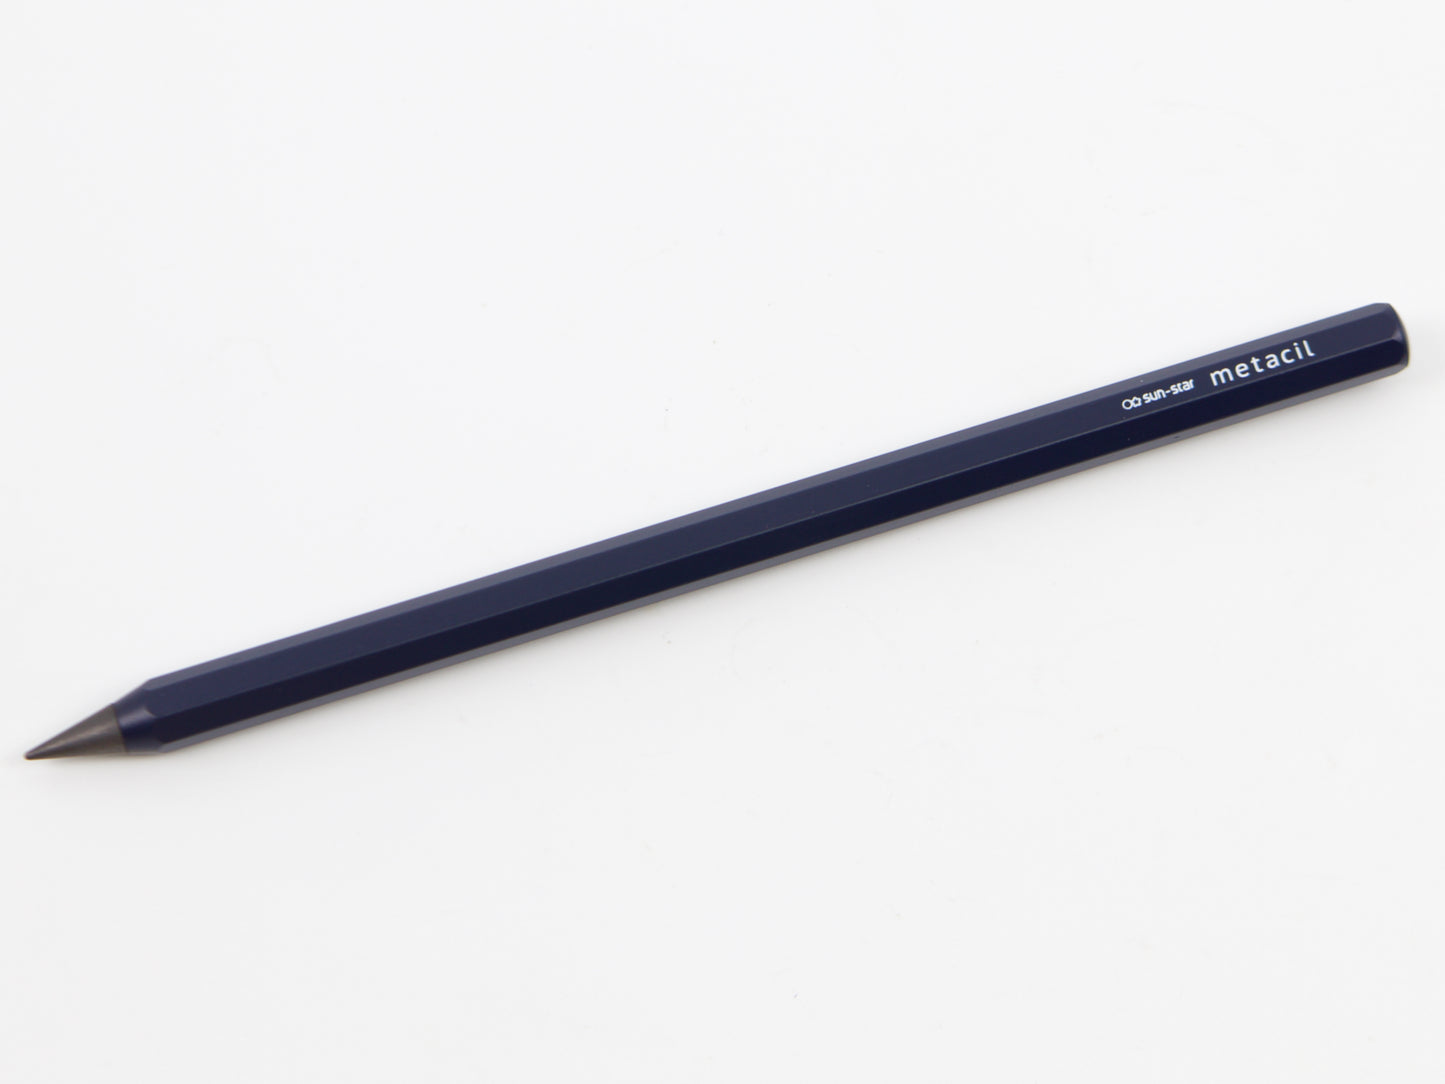 Metacil Metal Pencil – The Paper Mouse